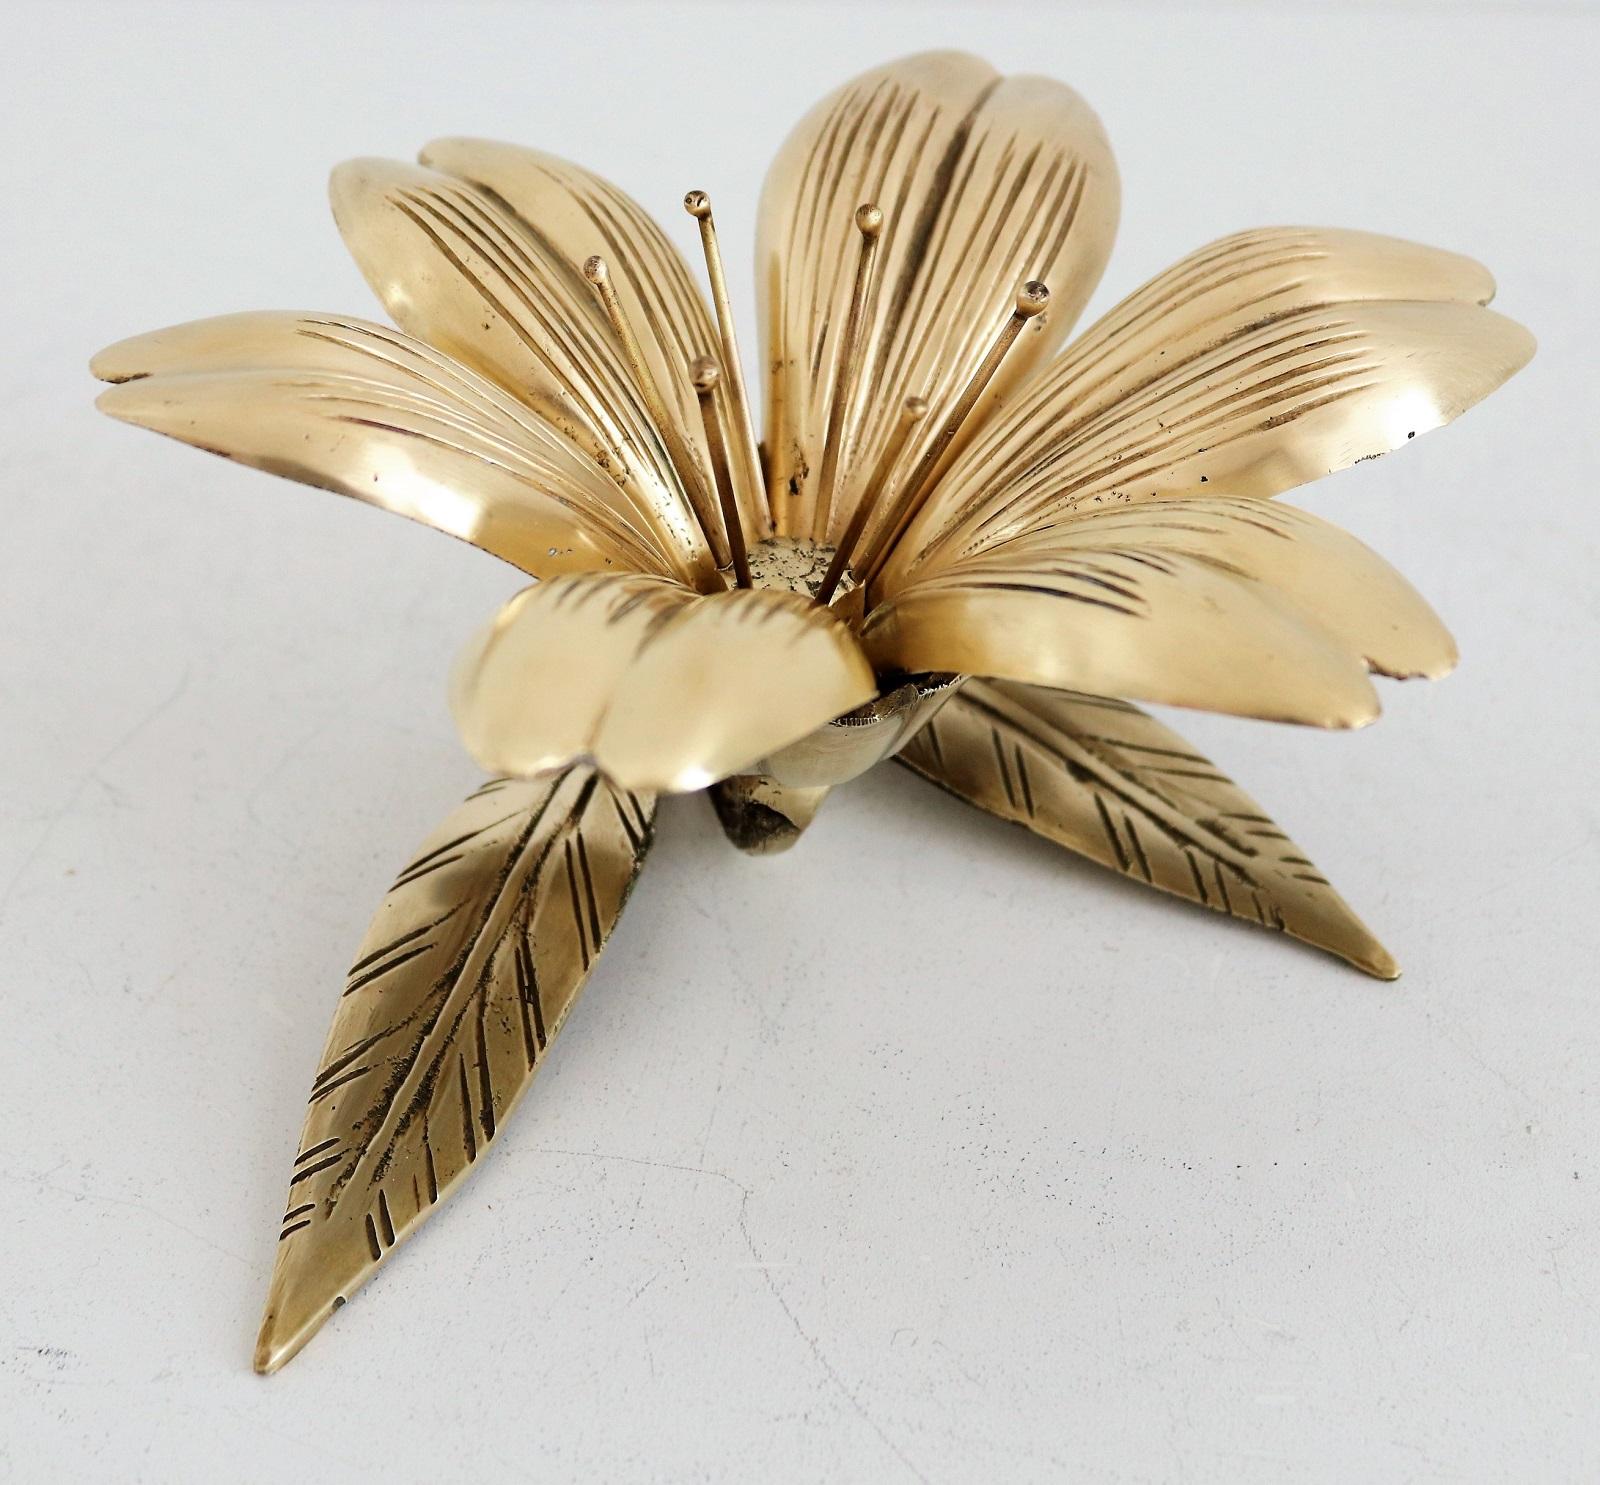 Mid-20th Century Italian Midcentury Flower in Brass with Petal Ashtrays for Cigarettes, 1950s